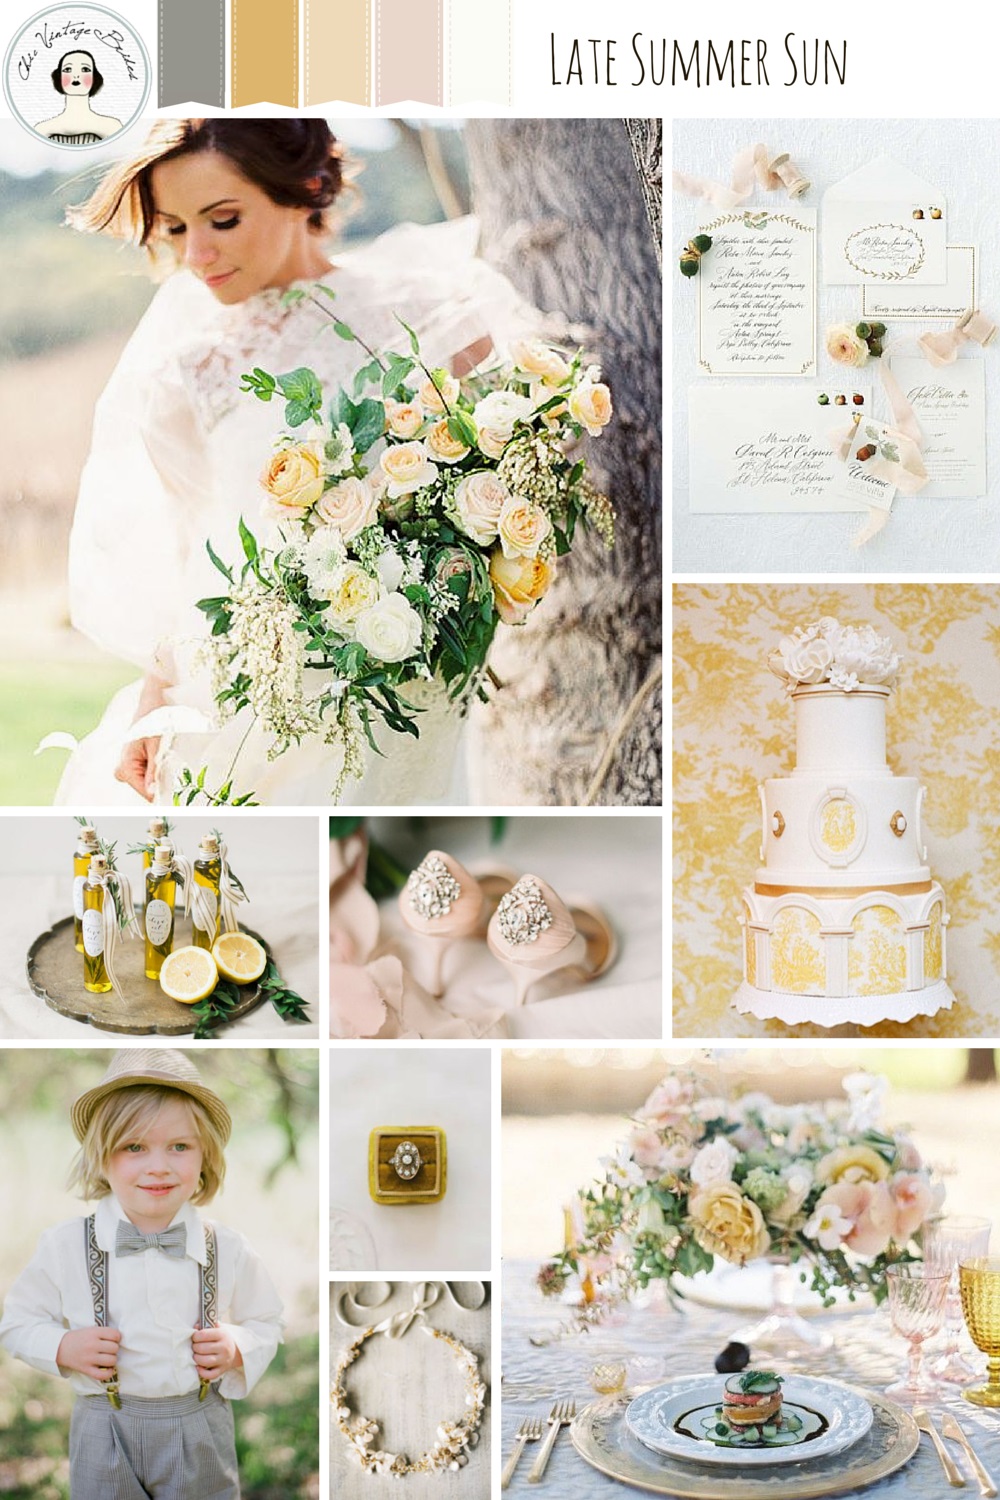 Romantic Late Summer Wedding Ideas in Shades of Grey, Dusky Yellow & Pink